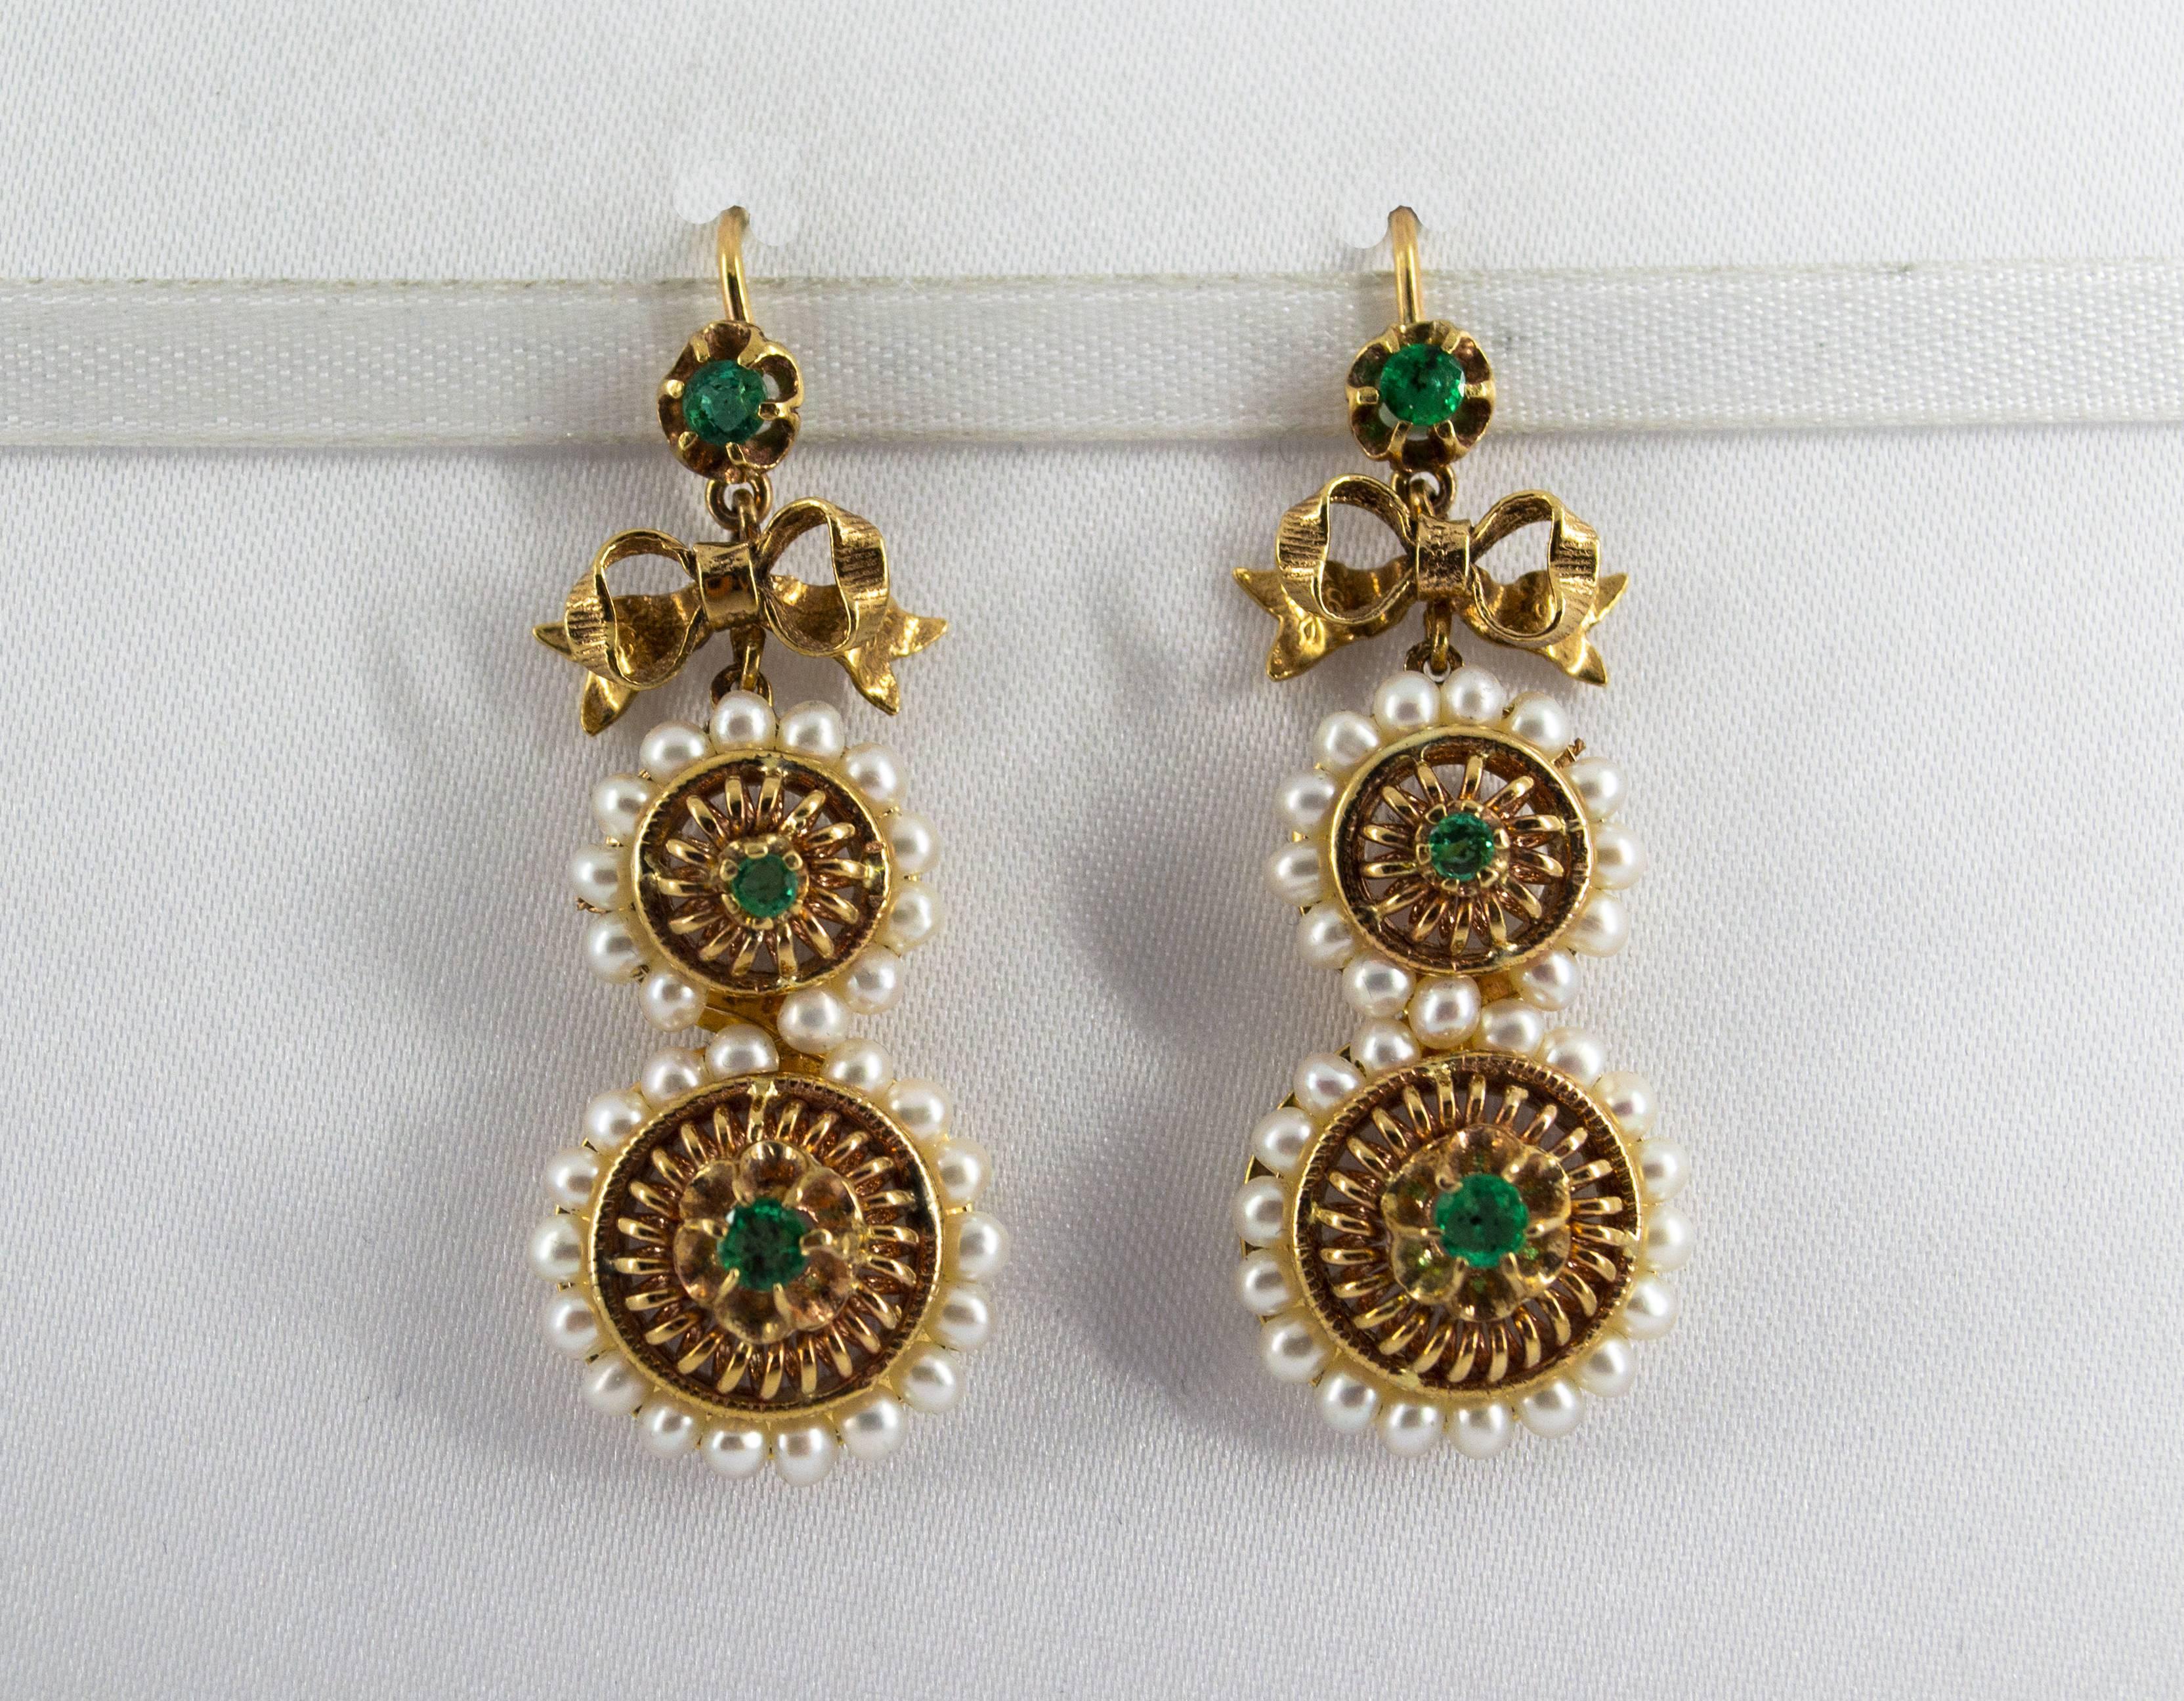 These Earrings are made of 9K Yellow Gold.
These Earrings have 1.00 Carat of Emeralds.
These Earrings have also Micro Pearls.
All our Earrings have pins for pierced ears but we can change the closure and make any of our Earrings suitable even for